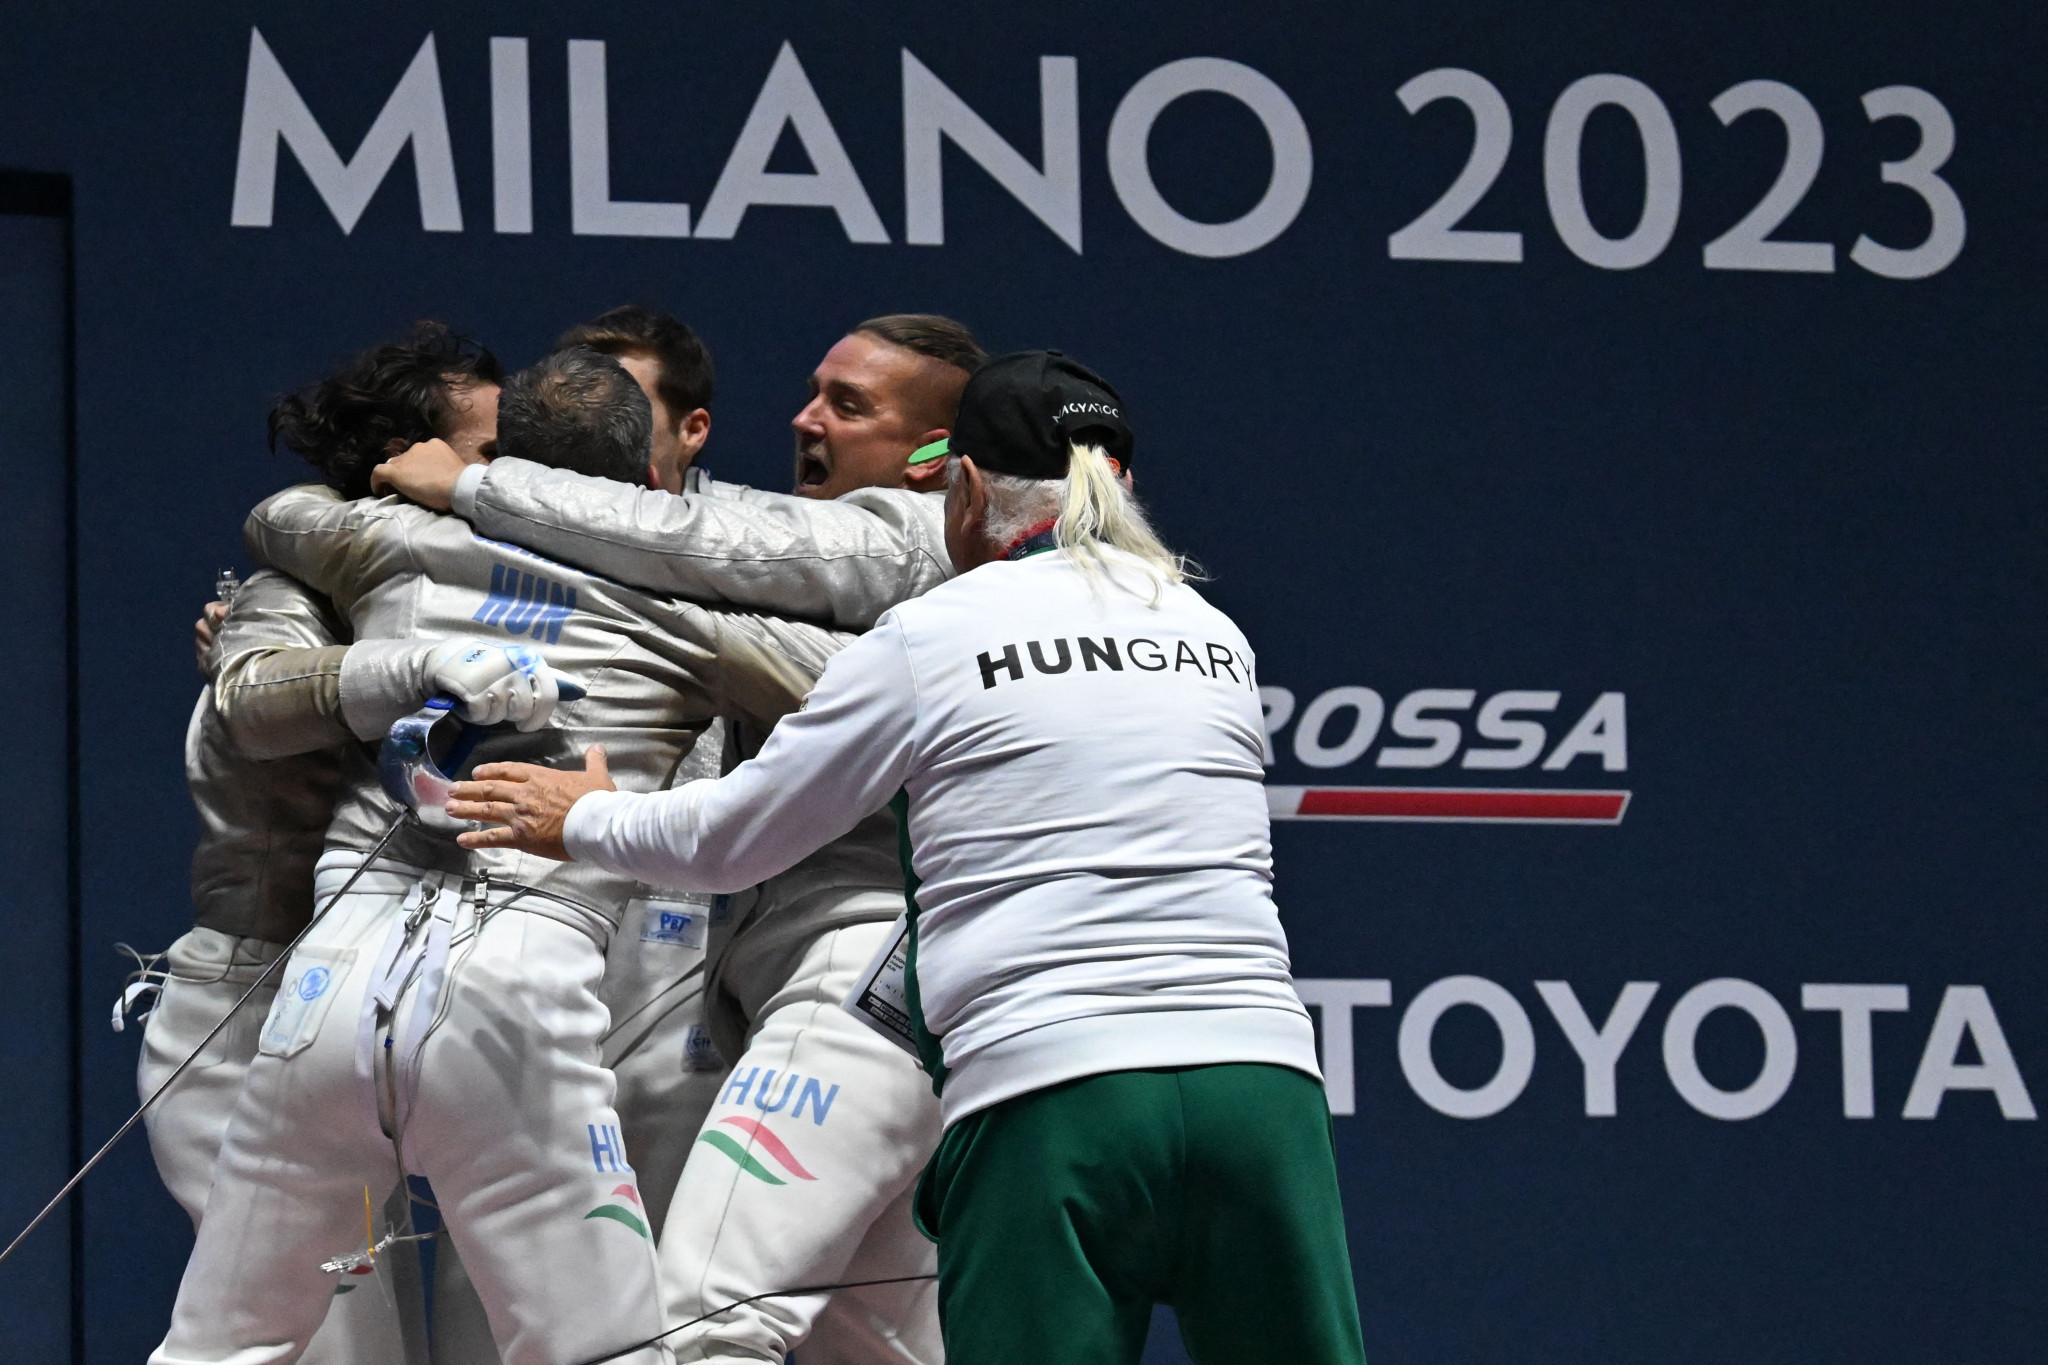 Hungary and Poland win first team titles at FIE Fencing World Championships